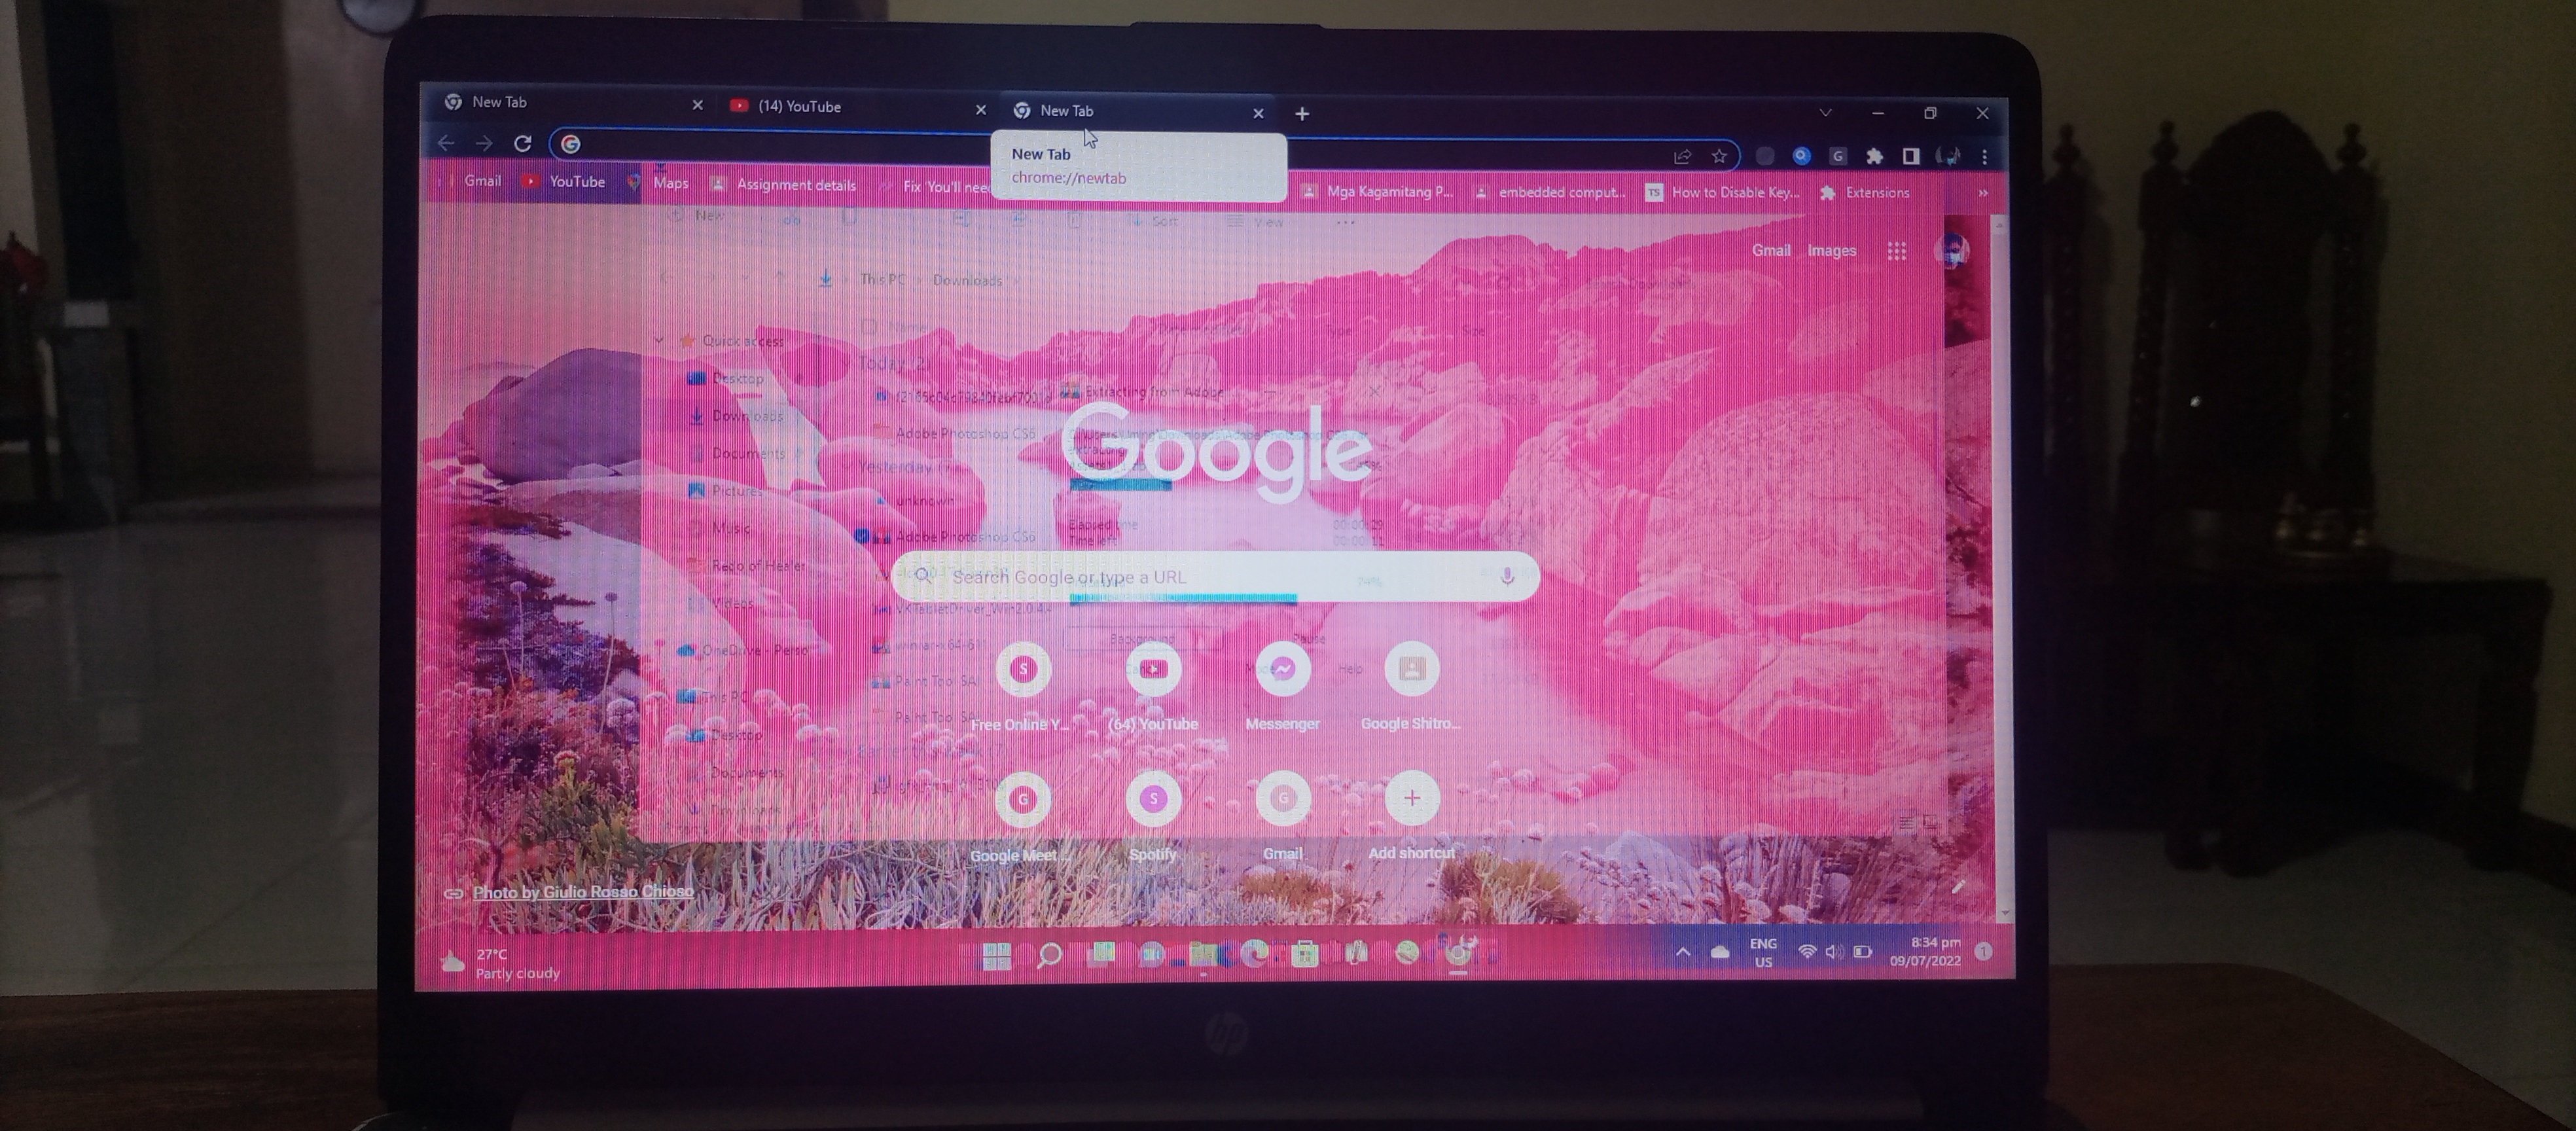 HP laptop getting pink screen on display - HP Support Community - 8426566